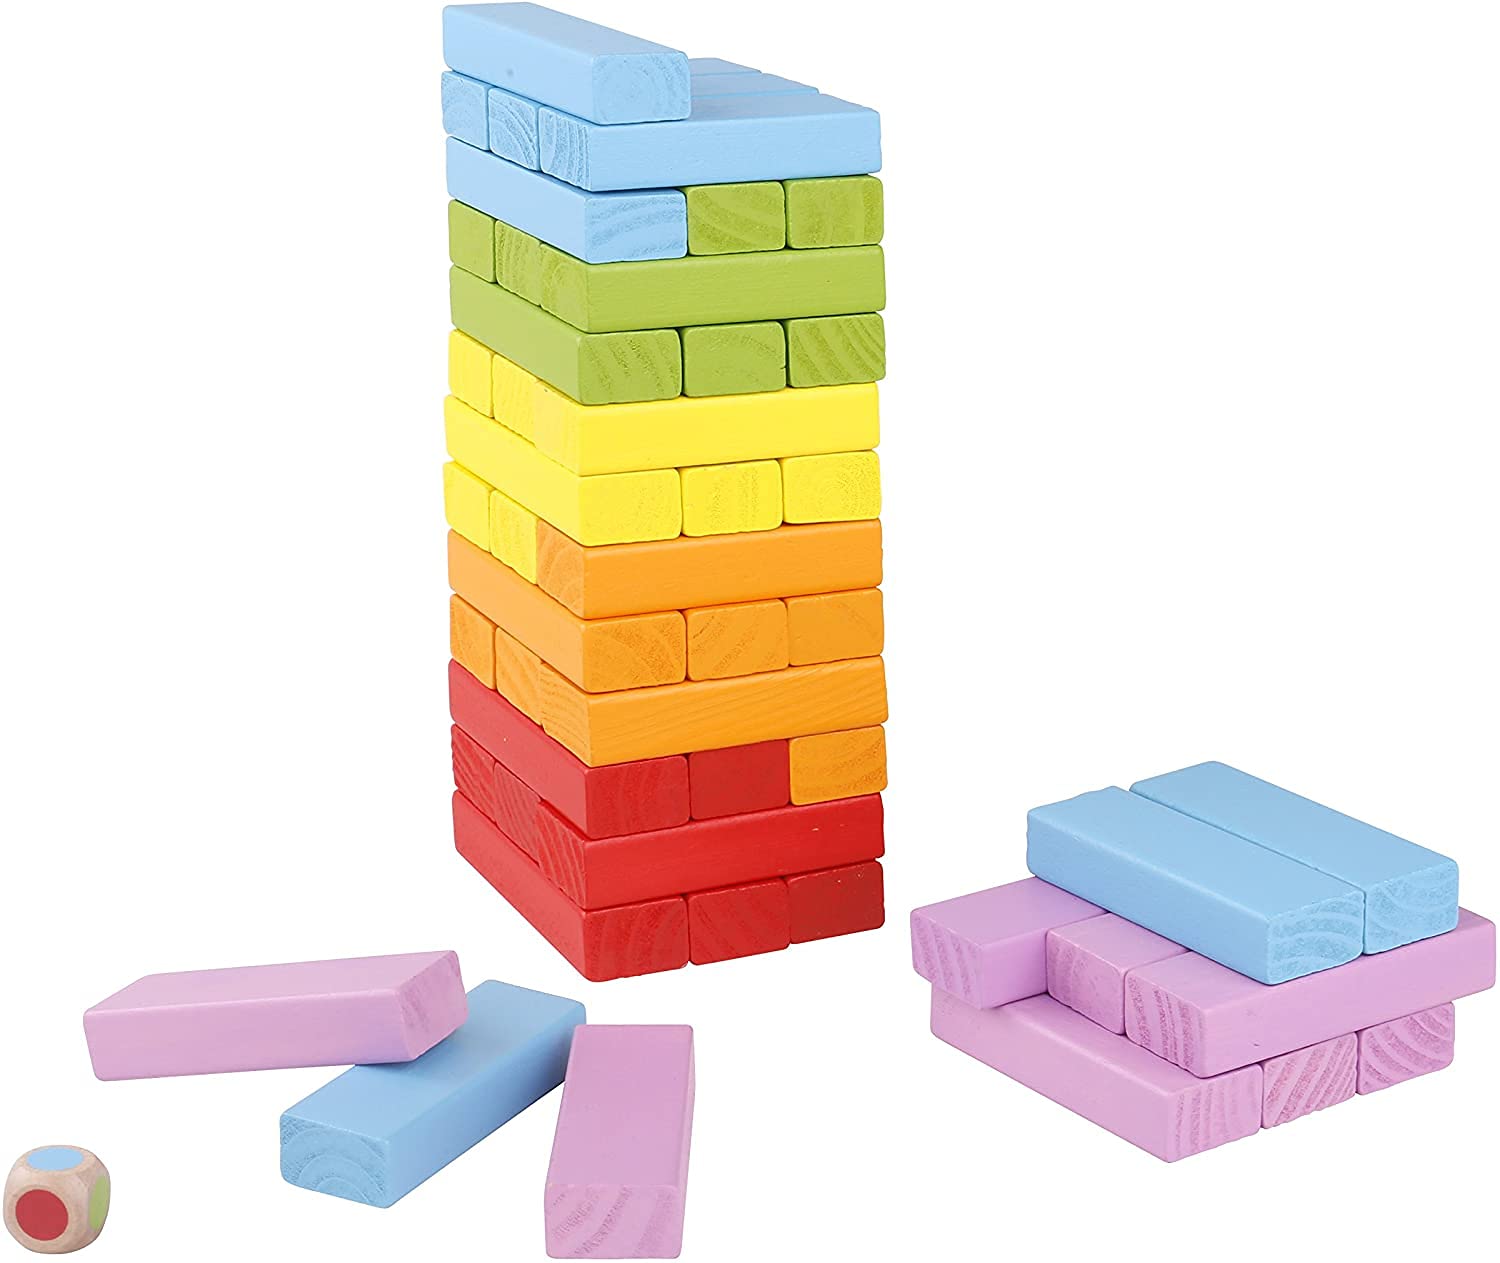 PLUSPOINT Wooden Balancing Blocks Stacking Game Colorful Tower Building Blocks Family Game Gift for Kids A Complete Game for All Ages (3-99) (Coloring Stacking Tower)